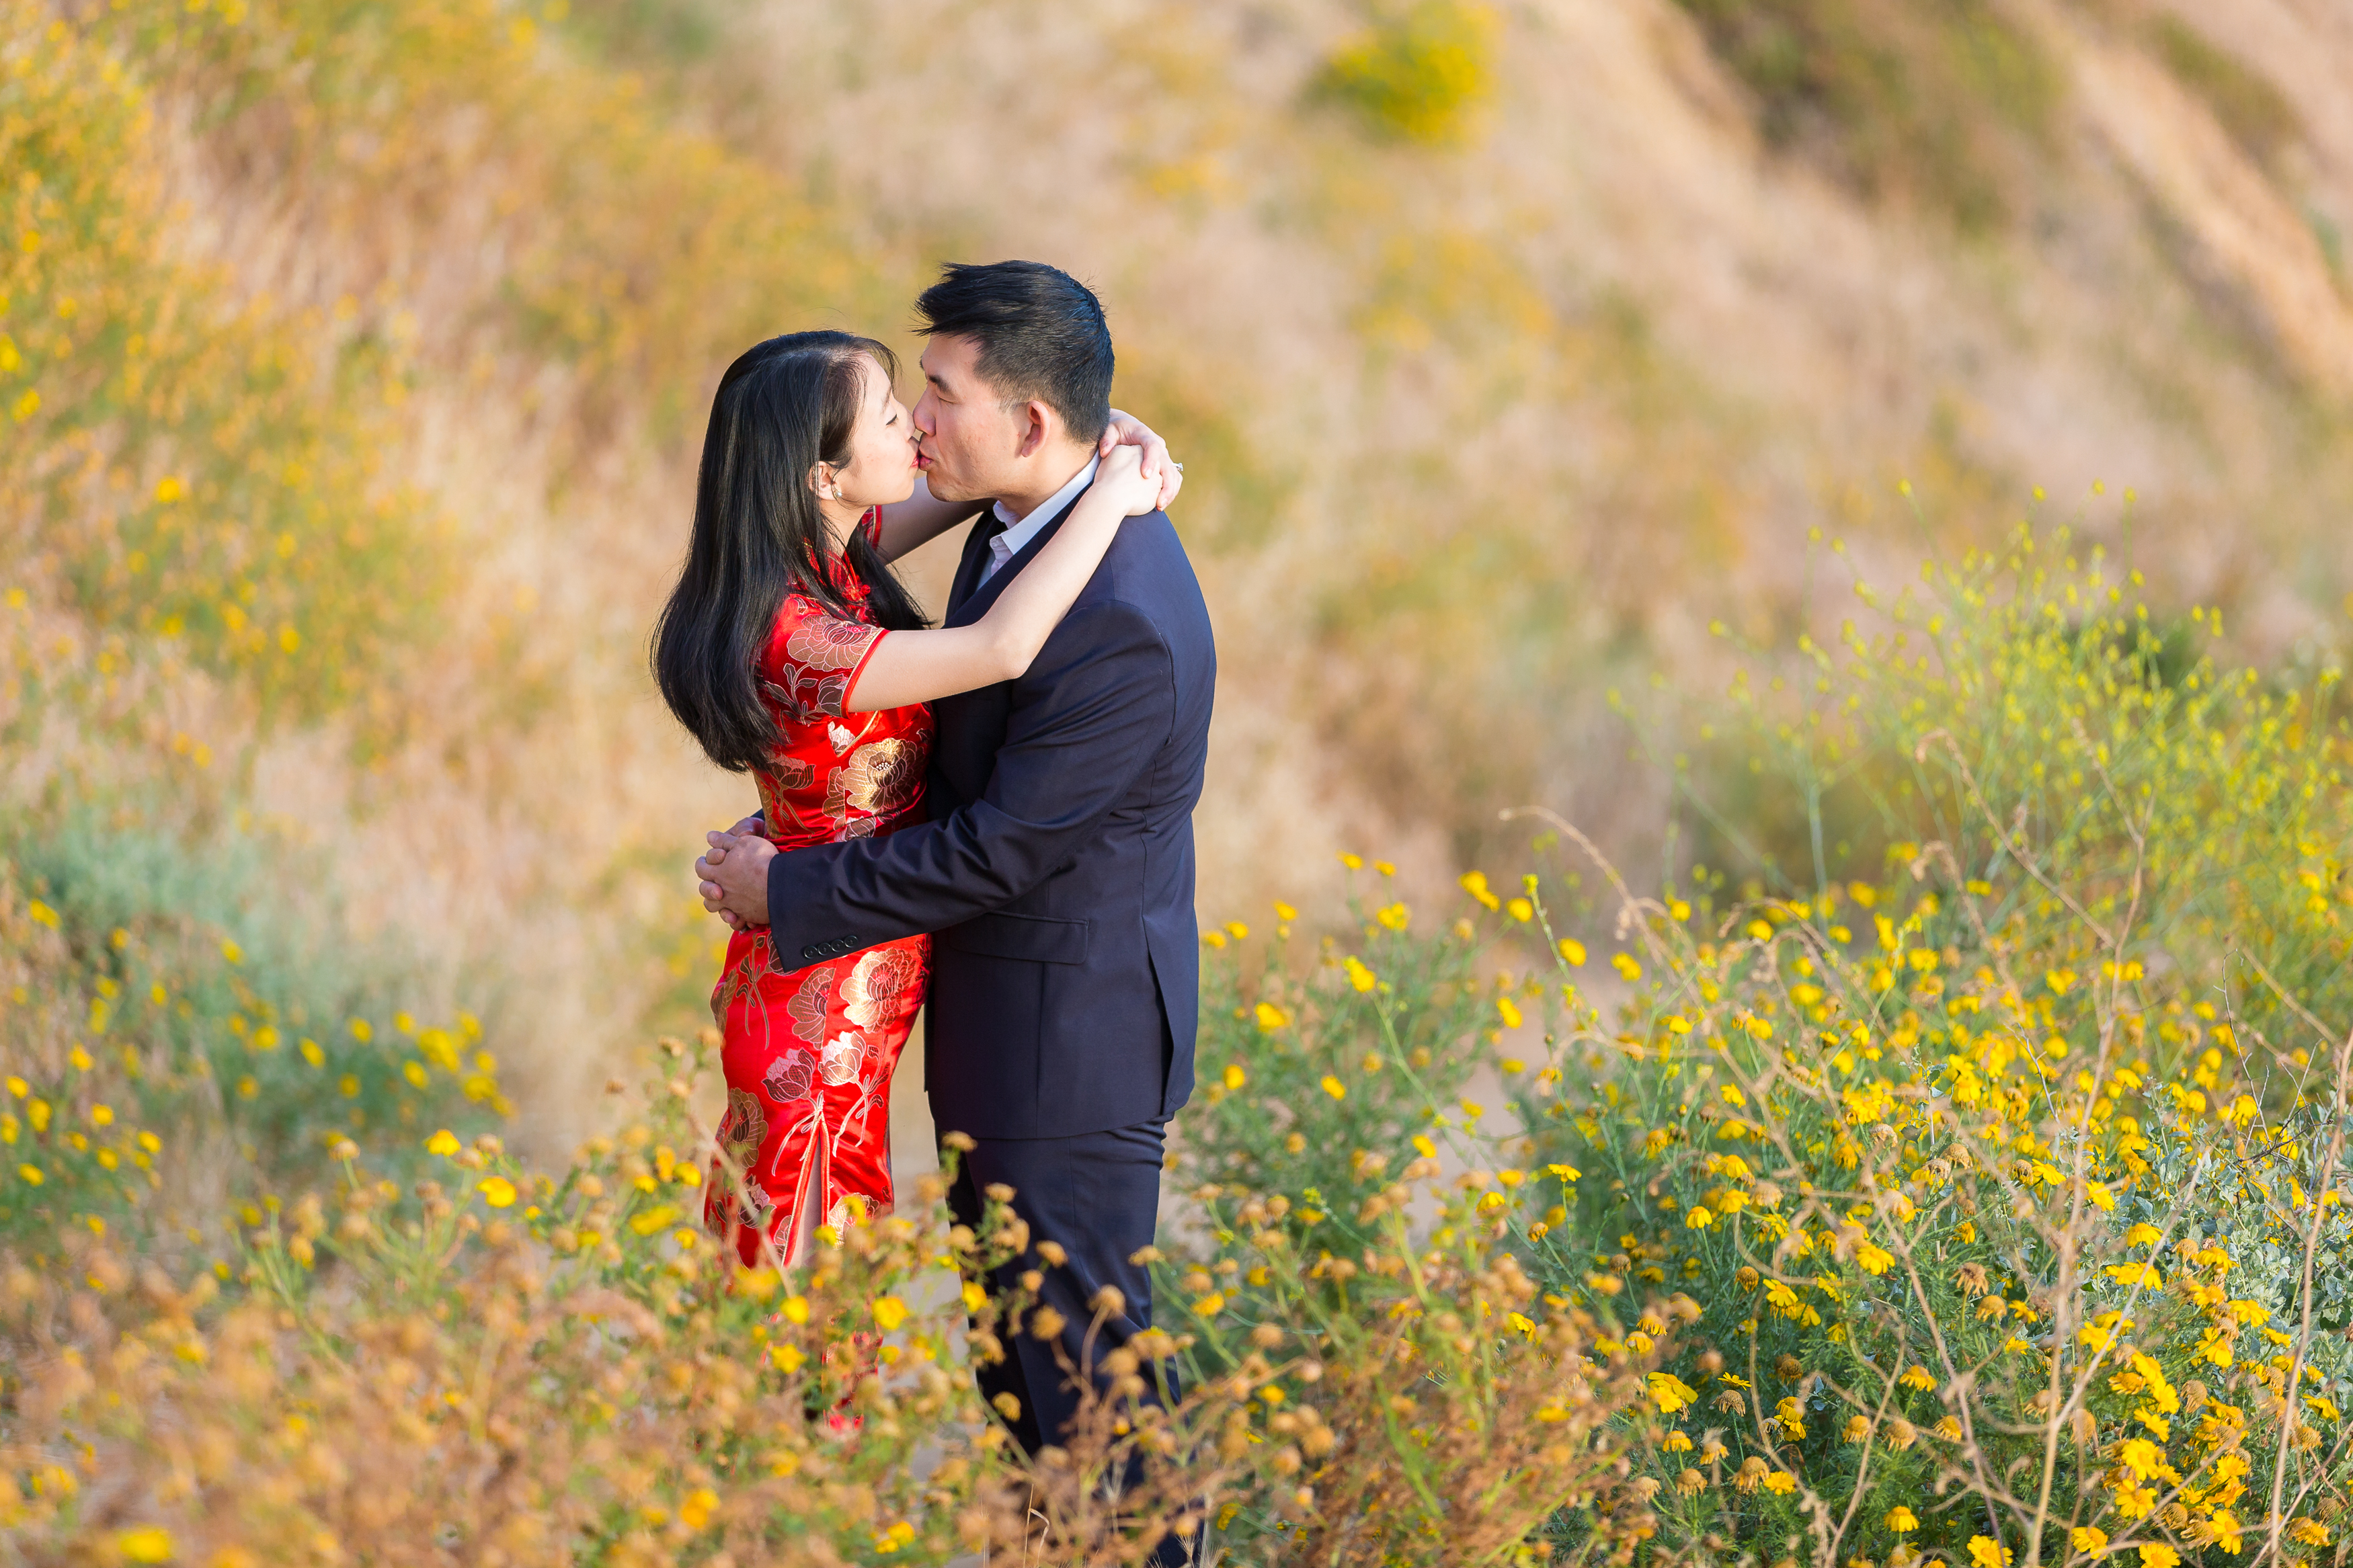 Engaged man and woman kissing amidst yellow flowers